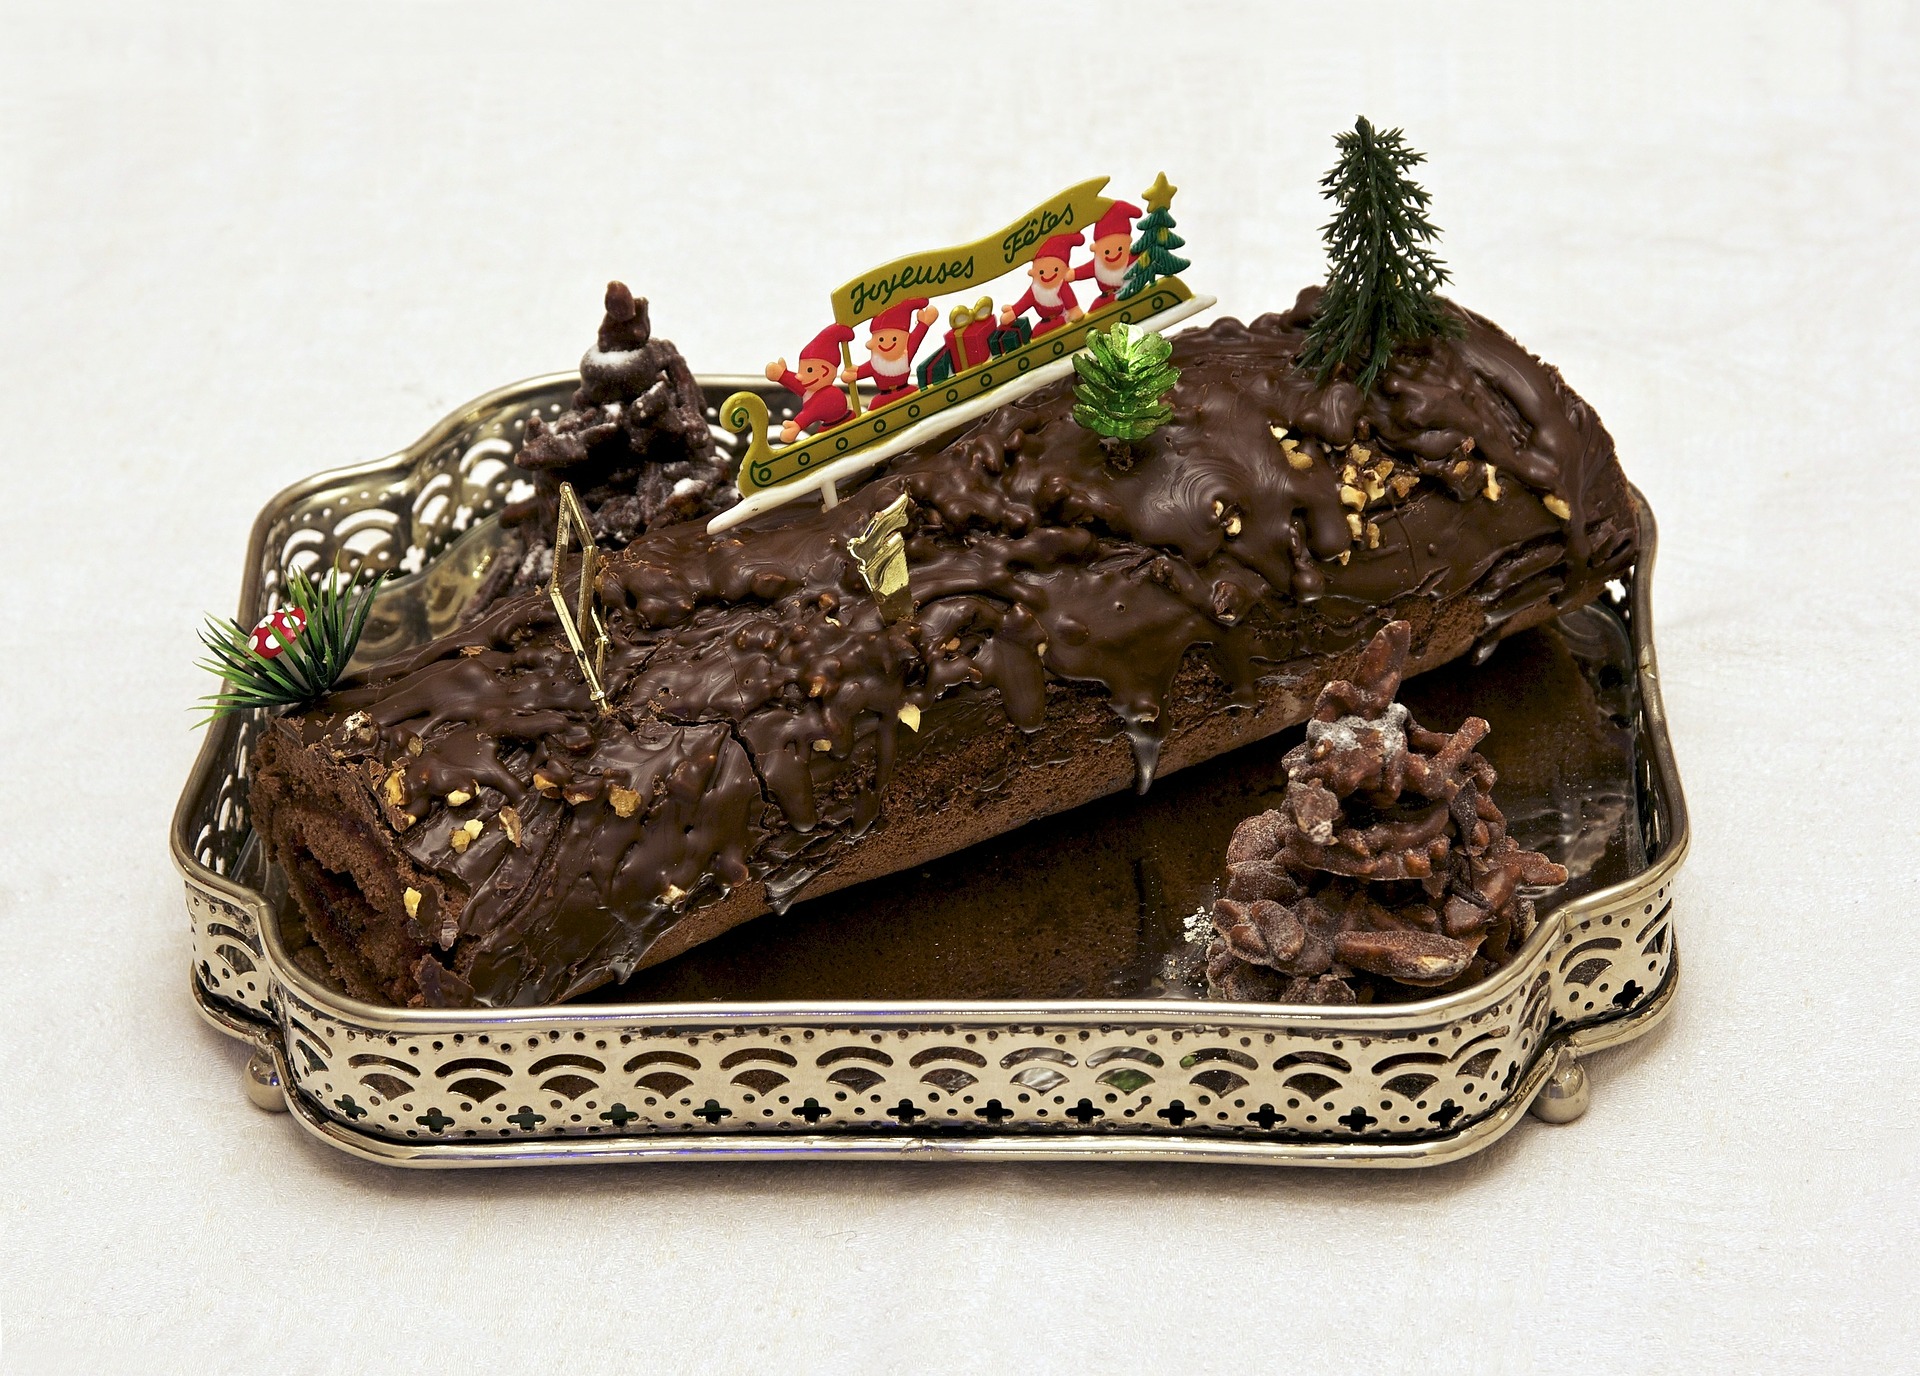 Christmas Food Traditions from Around the World